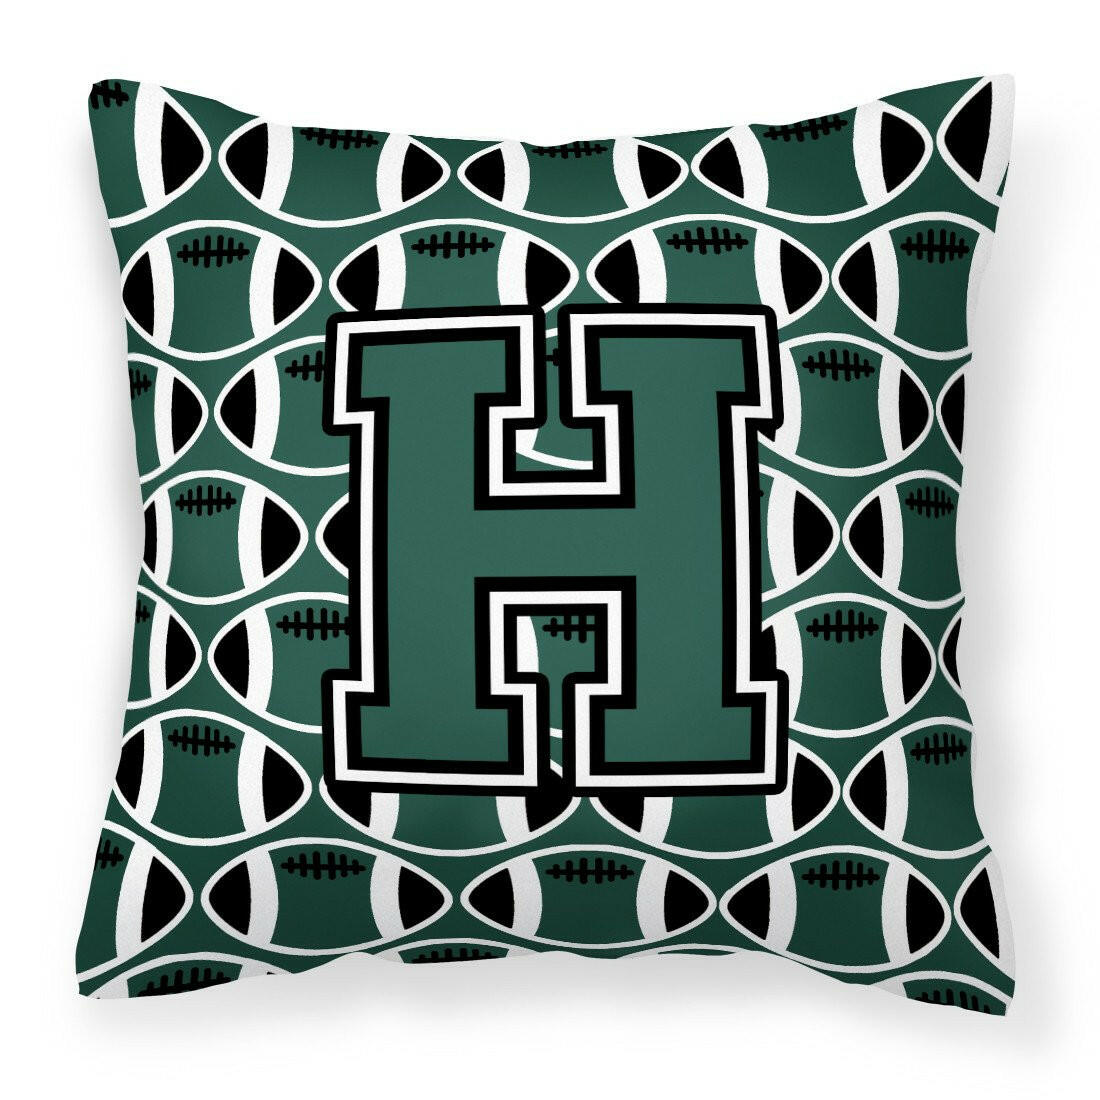 Letter H Football Green and White Fabric Decorative Pillow CJ1071-HPW1414 by Caroline's Treasures